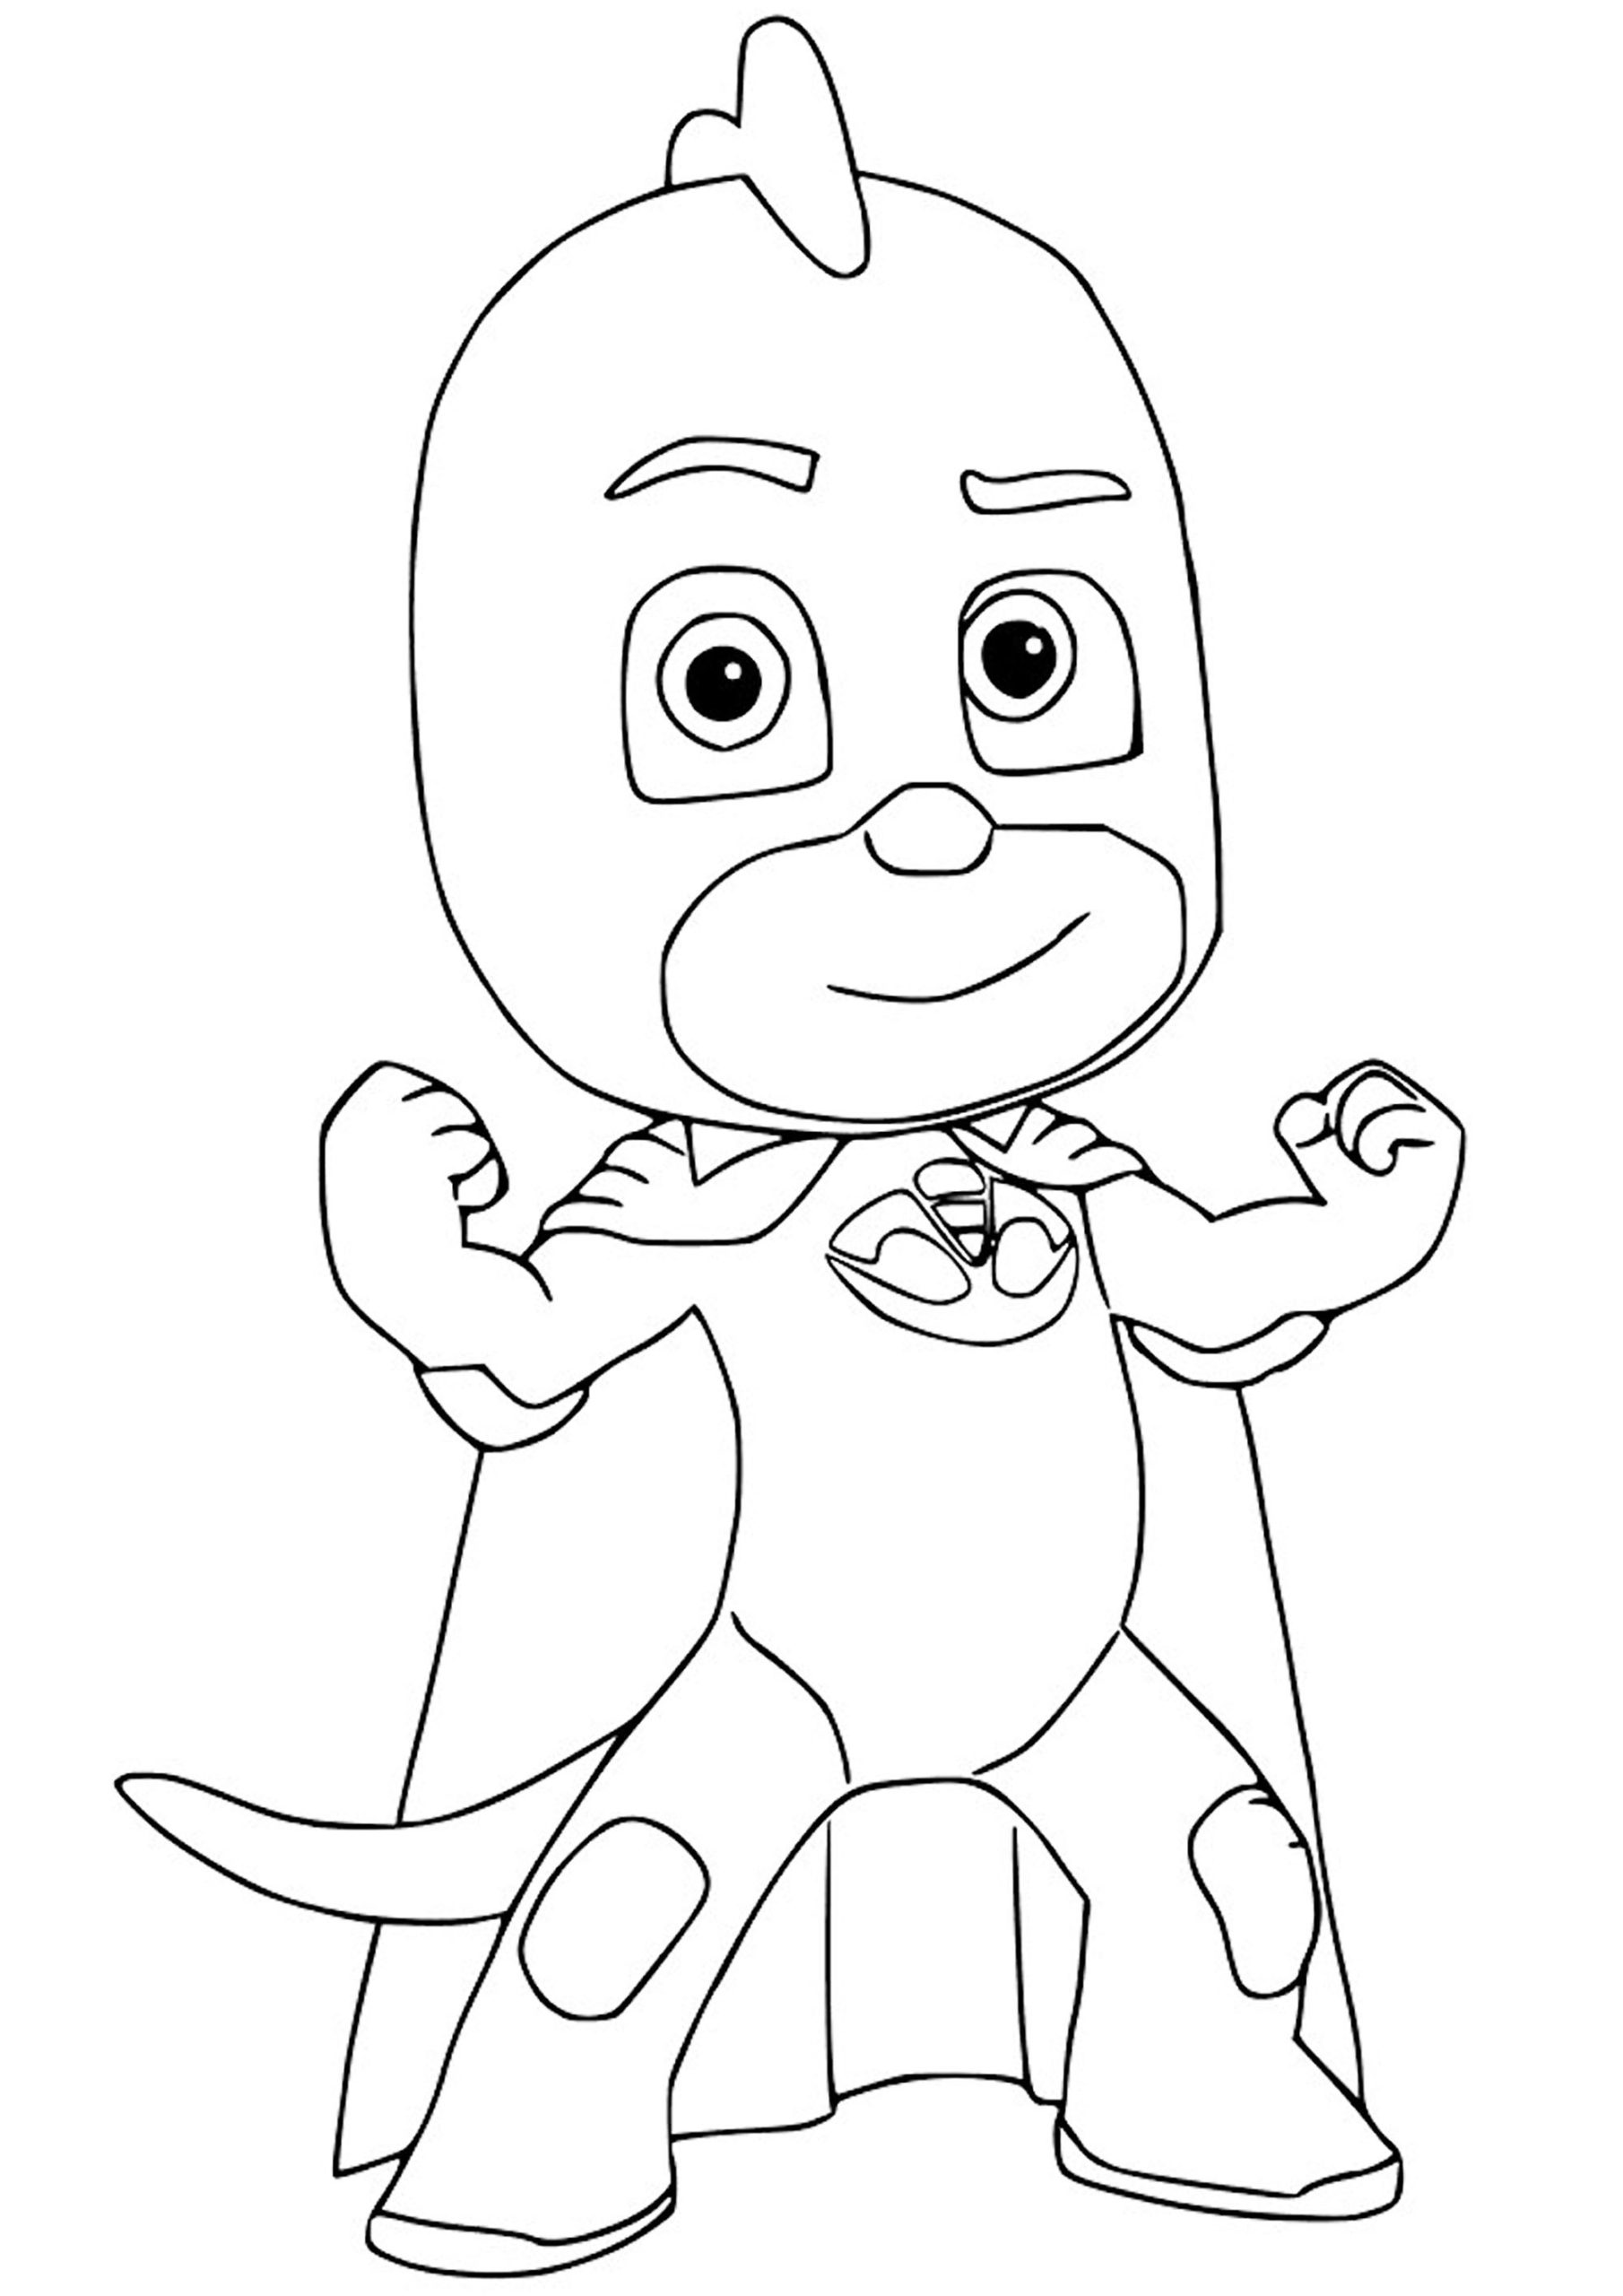 20 Most Out Of This World Masks Coloring Page To Print And Drawing ...